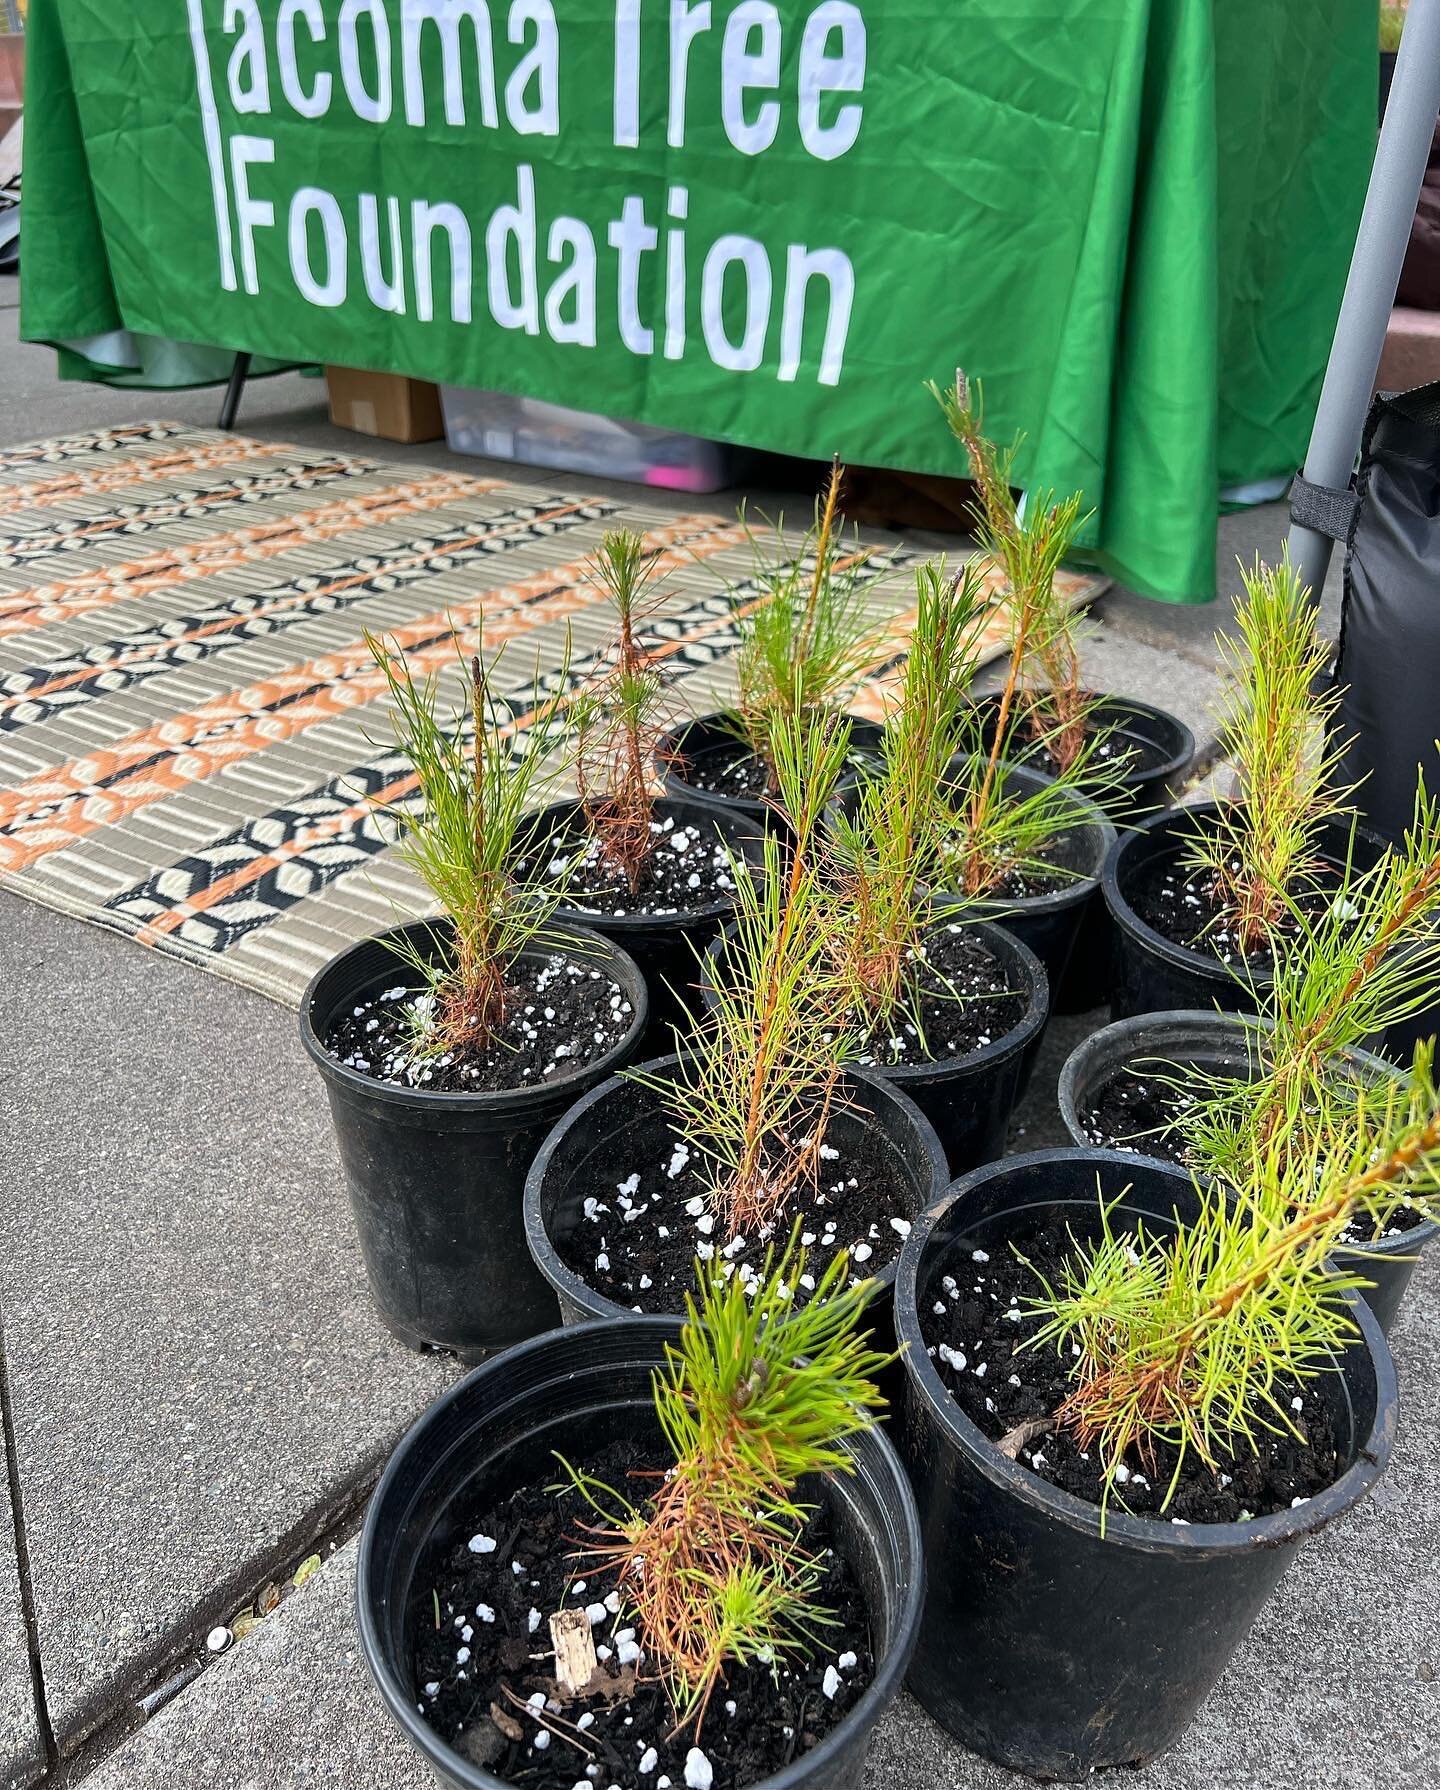 VOLUNTEER OPPORTUNITY! 🪴 We are looking for volunteers who can join us for a full day of tree potting at NWTrek this Tuesday, July 5! A carpool will leave at 9:00 a.m. from the Moore Branch of Tacoma Public Library at 215 S 56th St, Tacoma, WA 98408